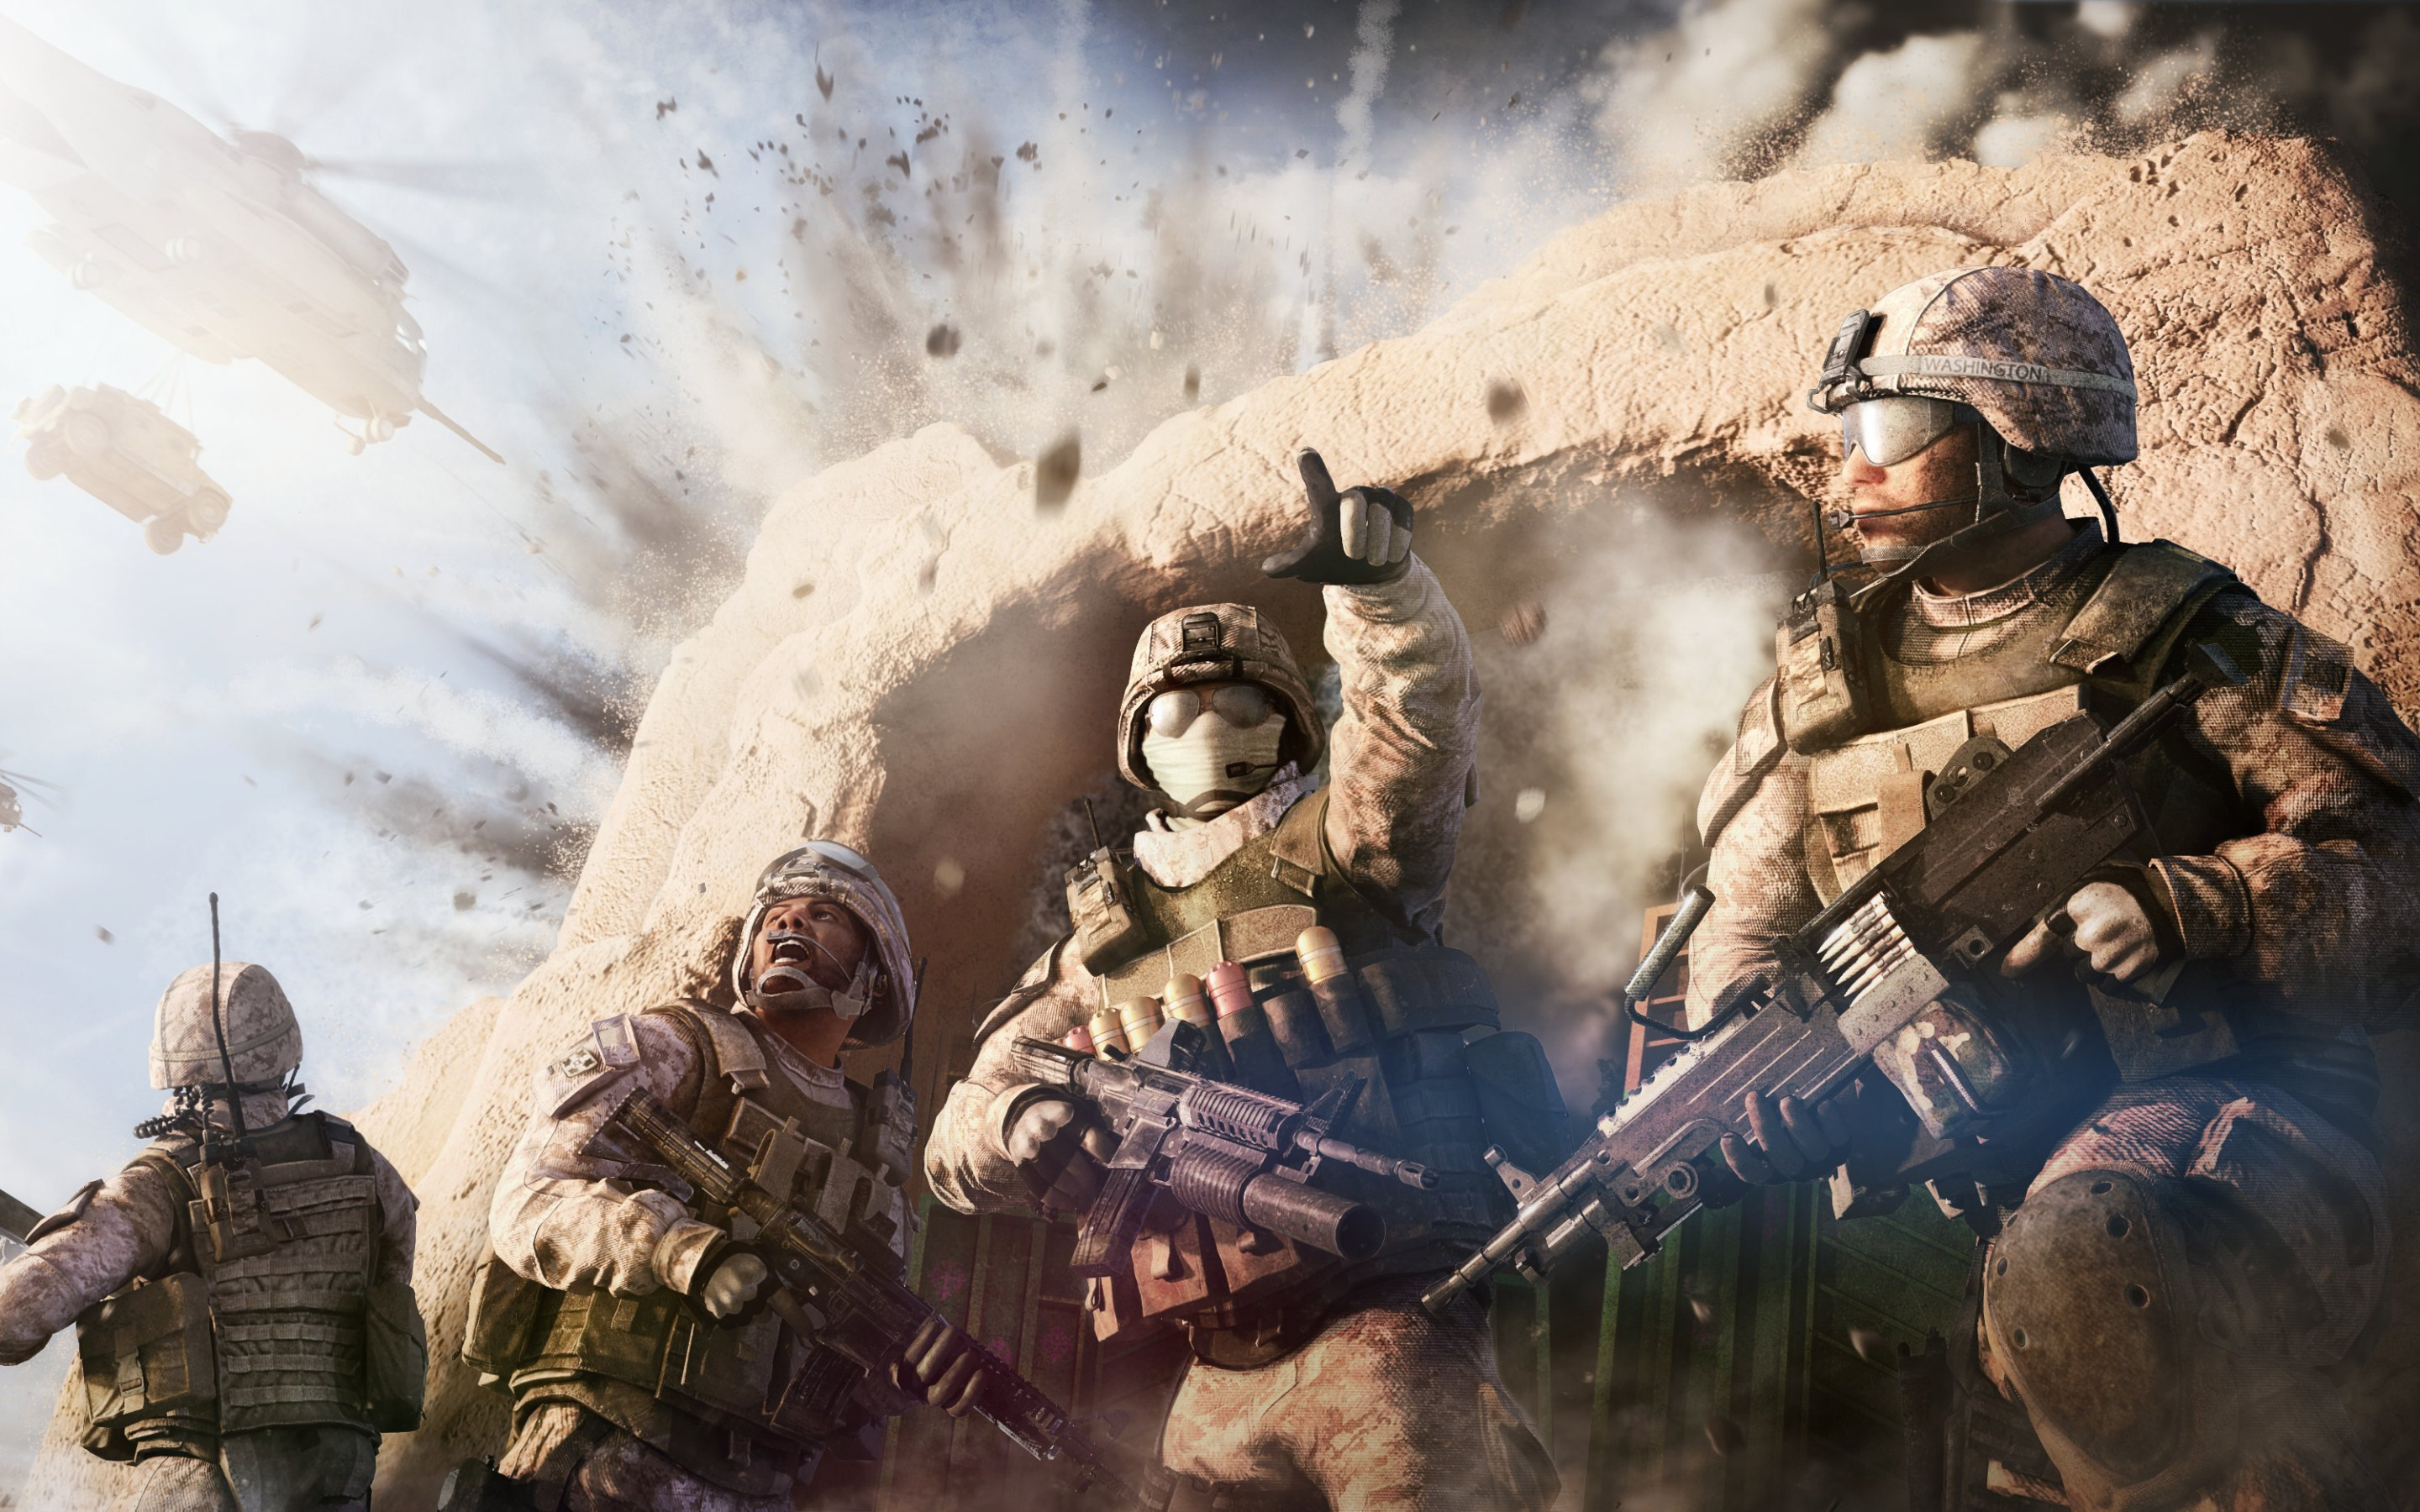 Вк про войну. Operation Flashpoint: Red River. Flashpoint Red River. Операция флешпоинт. Medal of Honor: Warfighter.